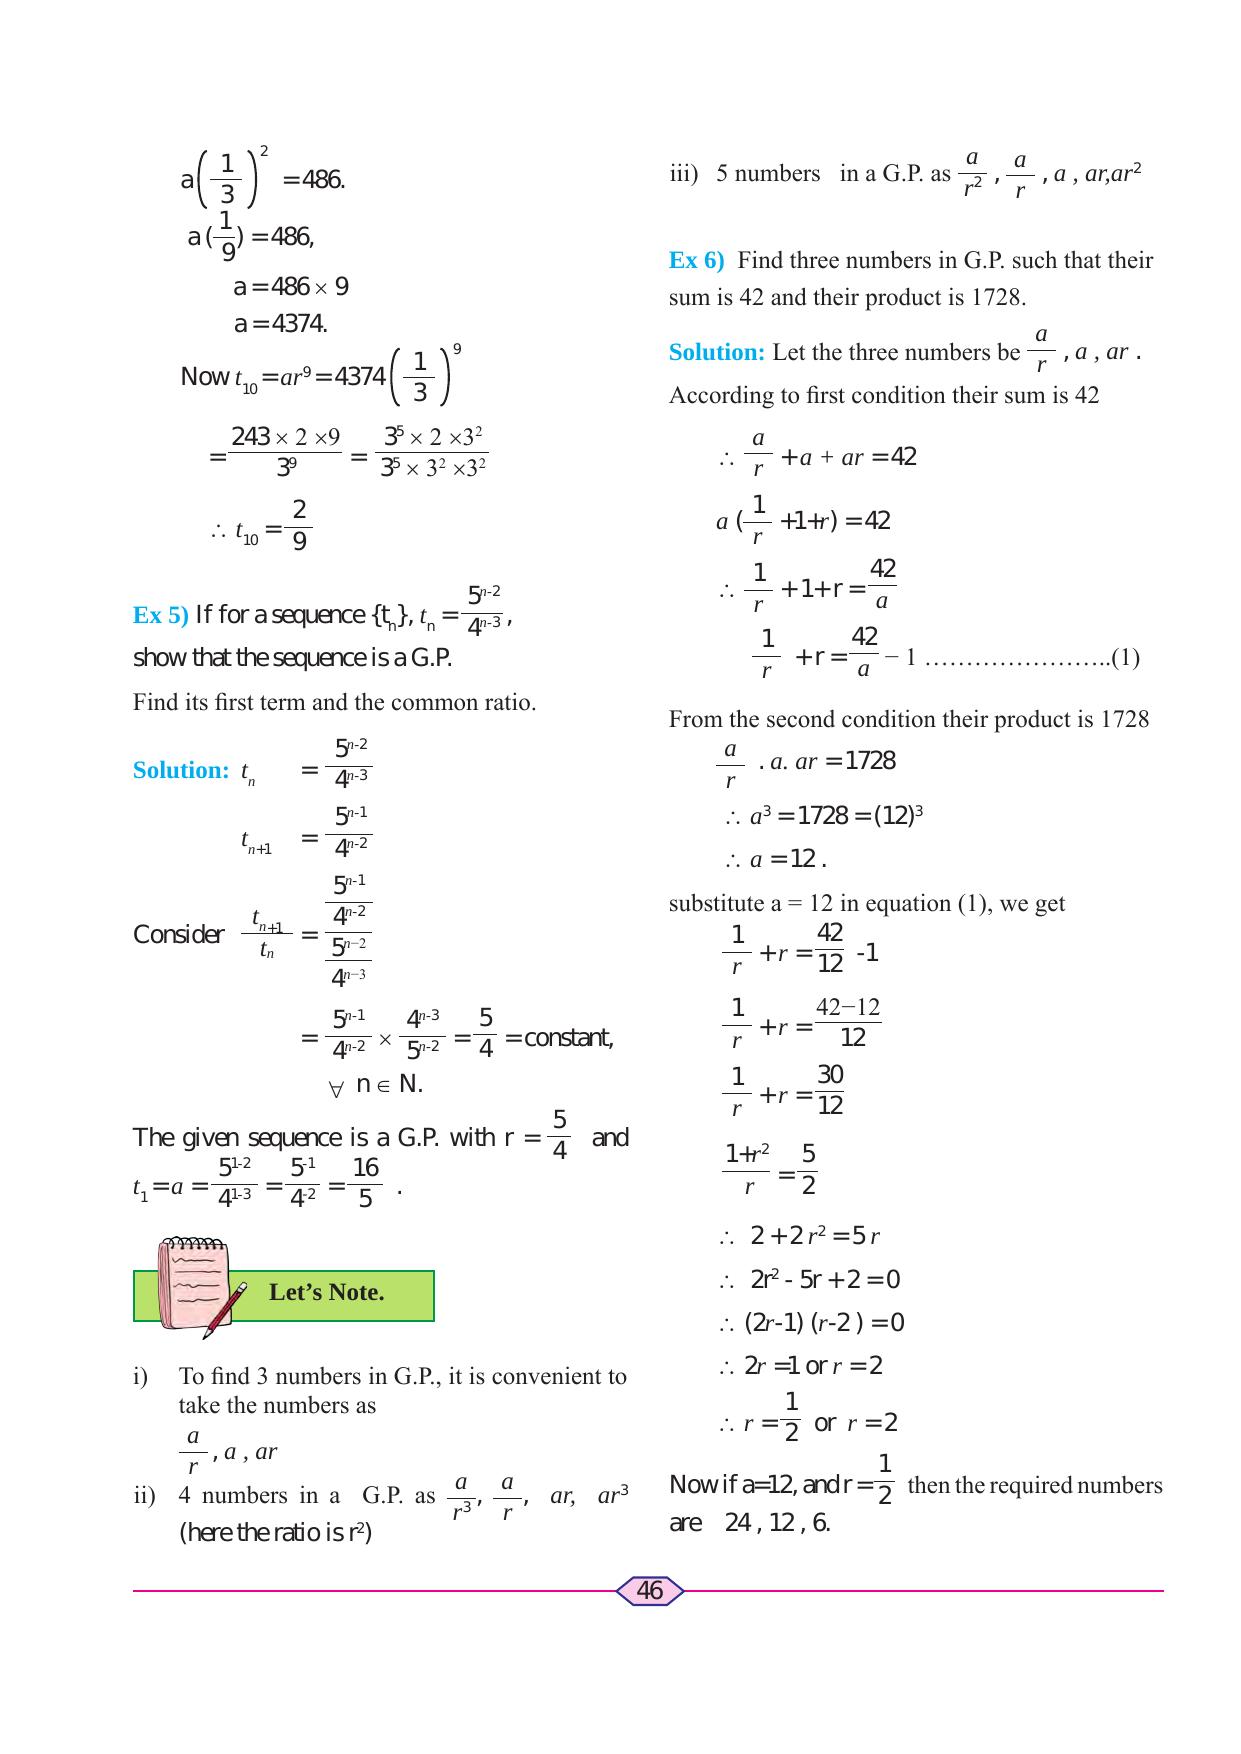 Maharashtra Board Class 11 Maths (Commerce) (Part 1) Textbook - Page 56